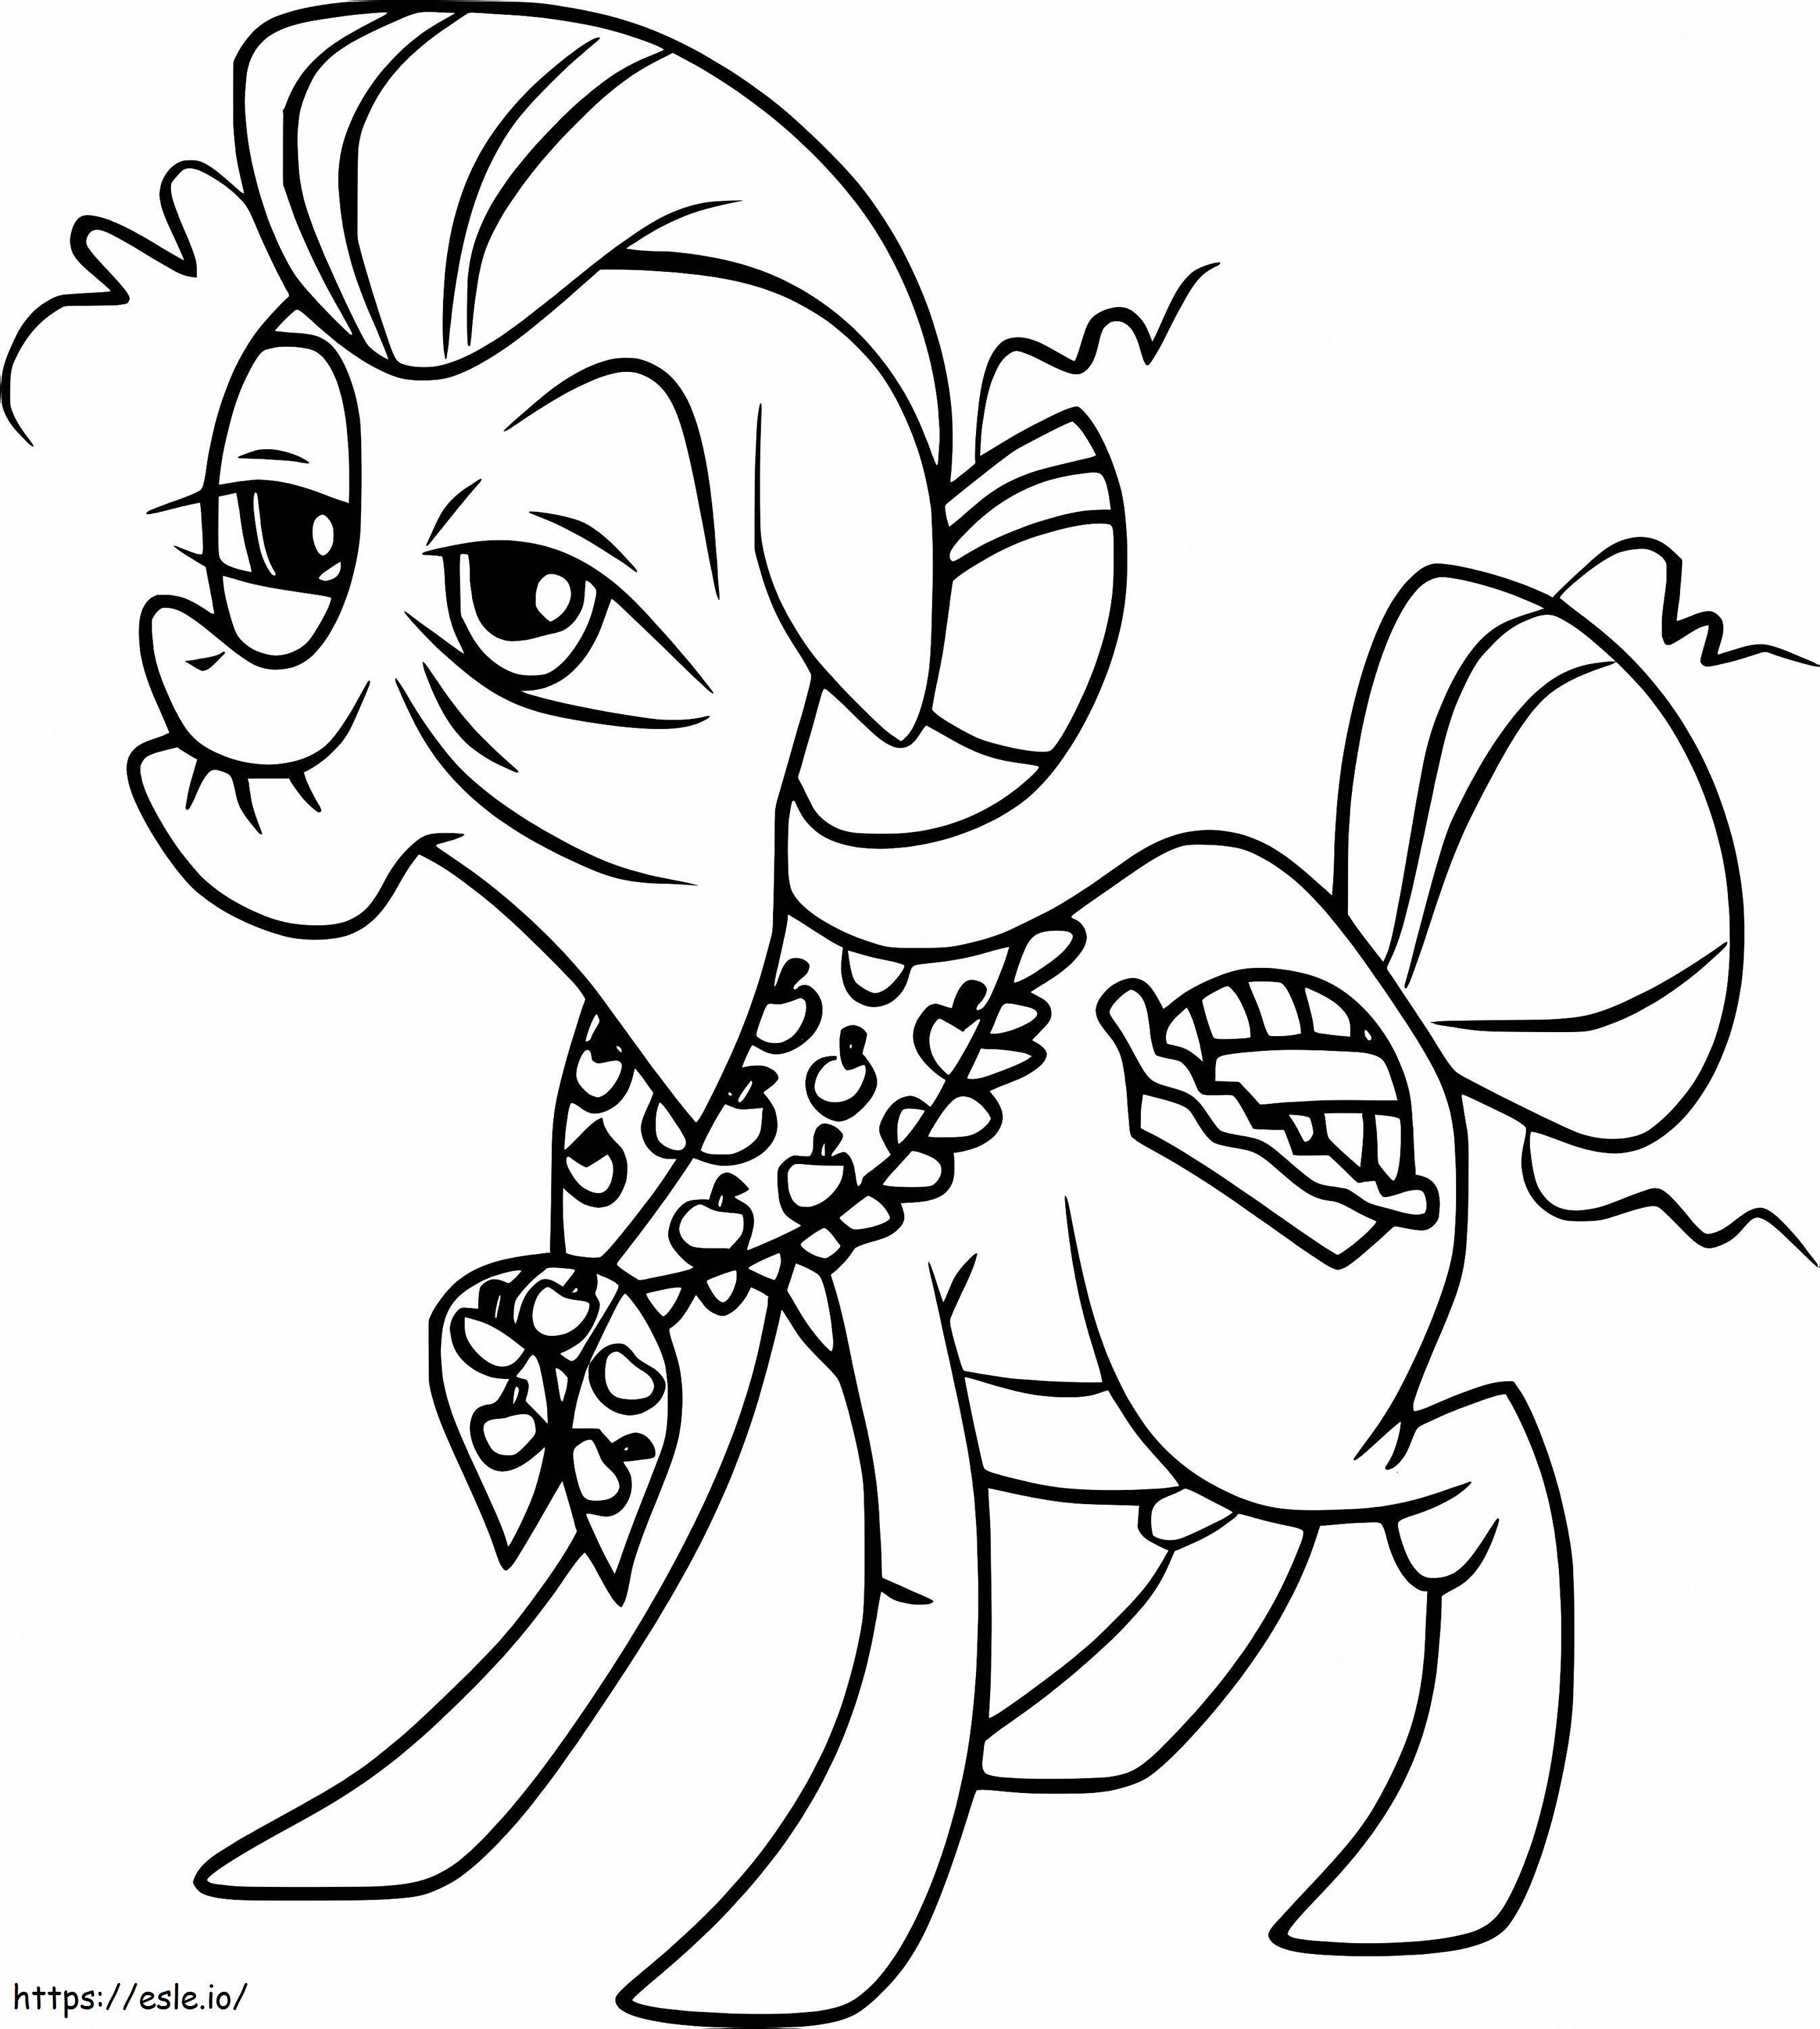 Granny Smith From My Little Pony coloring page